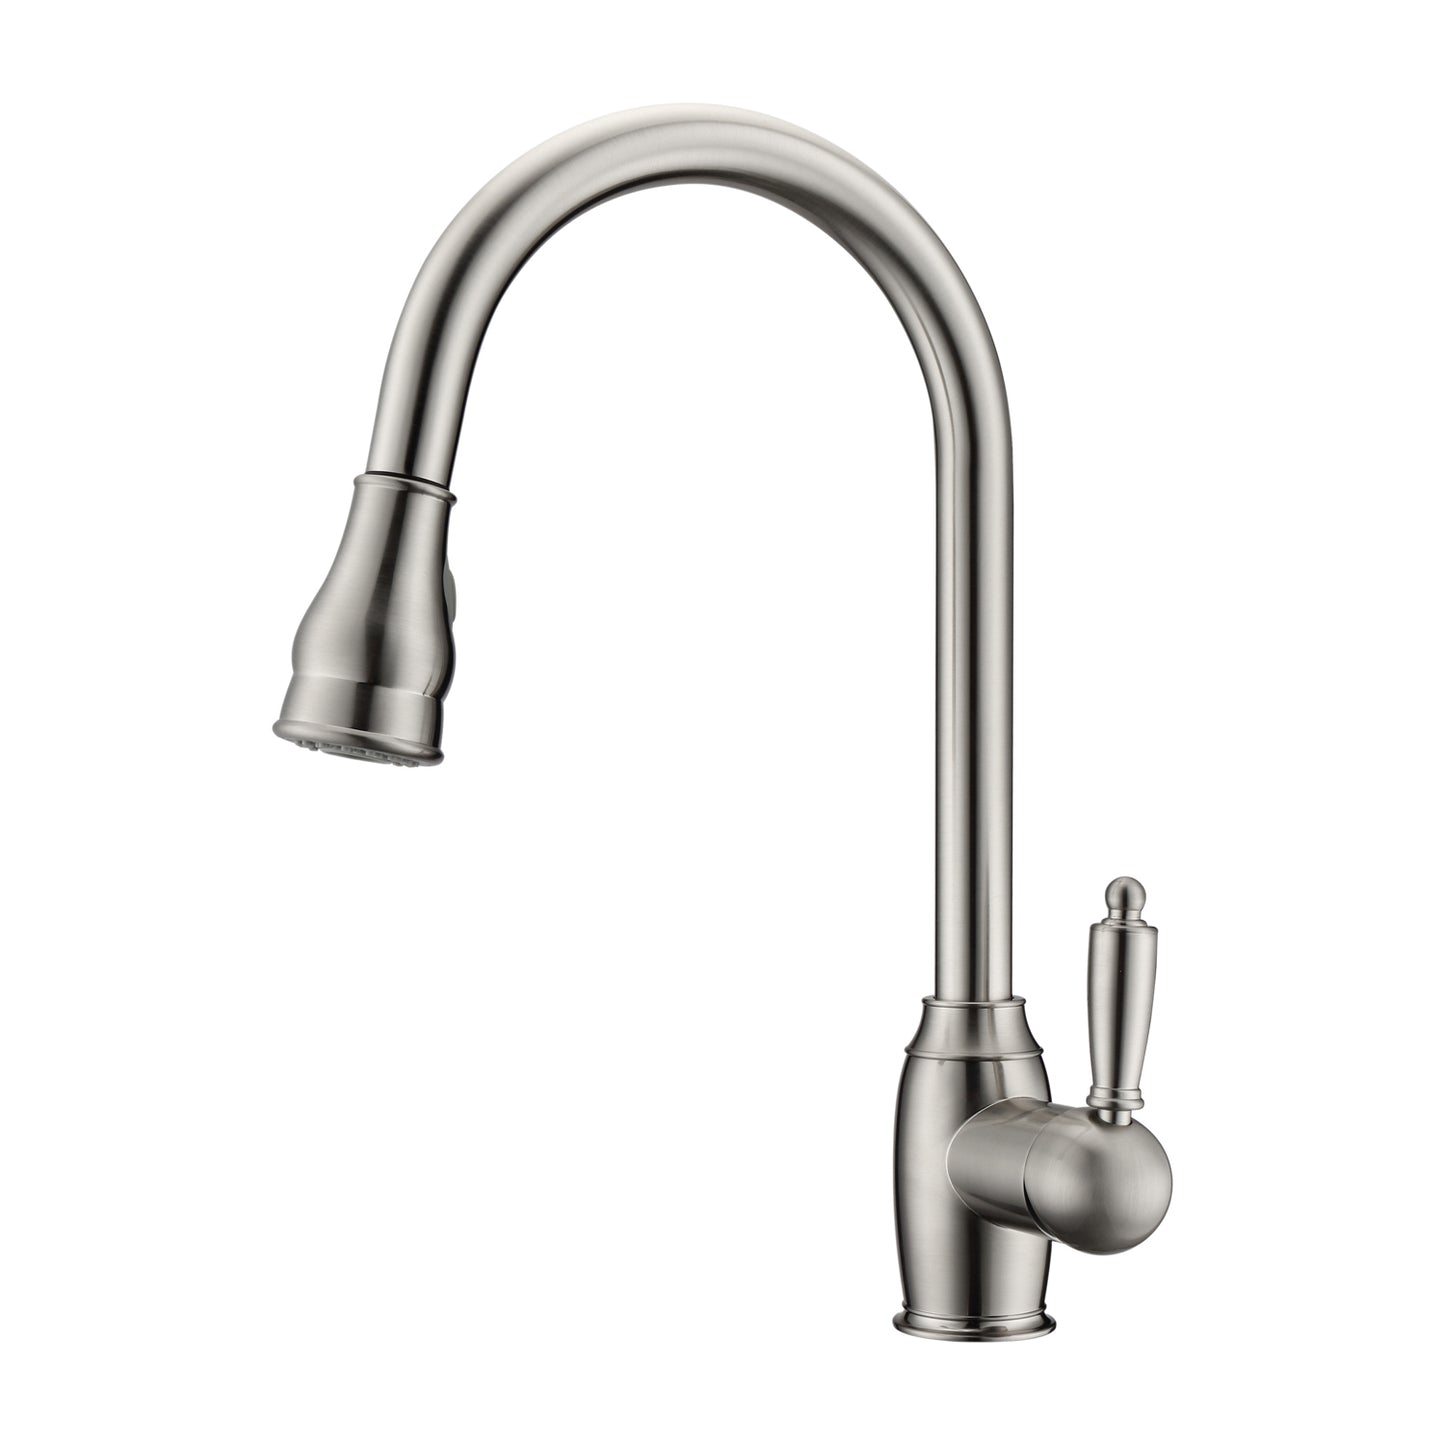 Bay 2 Kitchen Faucet, Pull-Out Sprayer, Single Lever Handle, Brushed Nickel